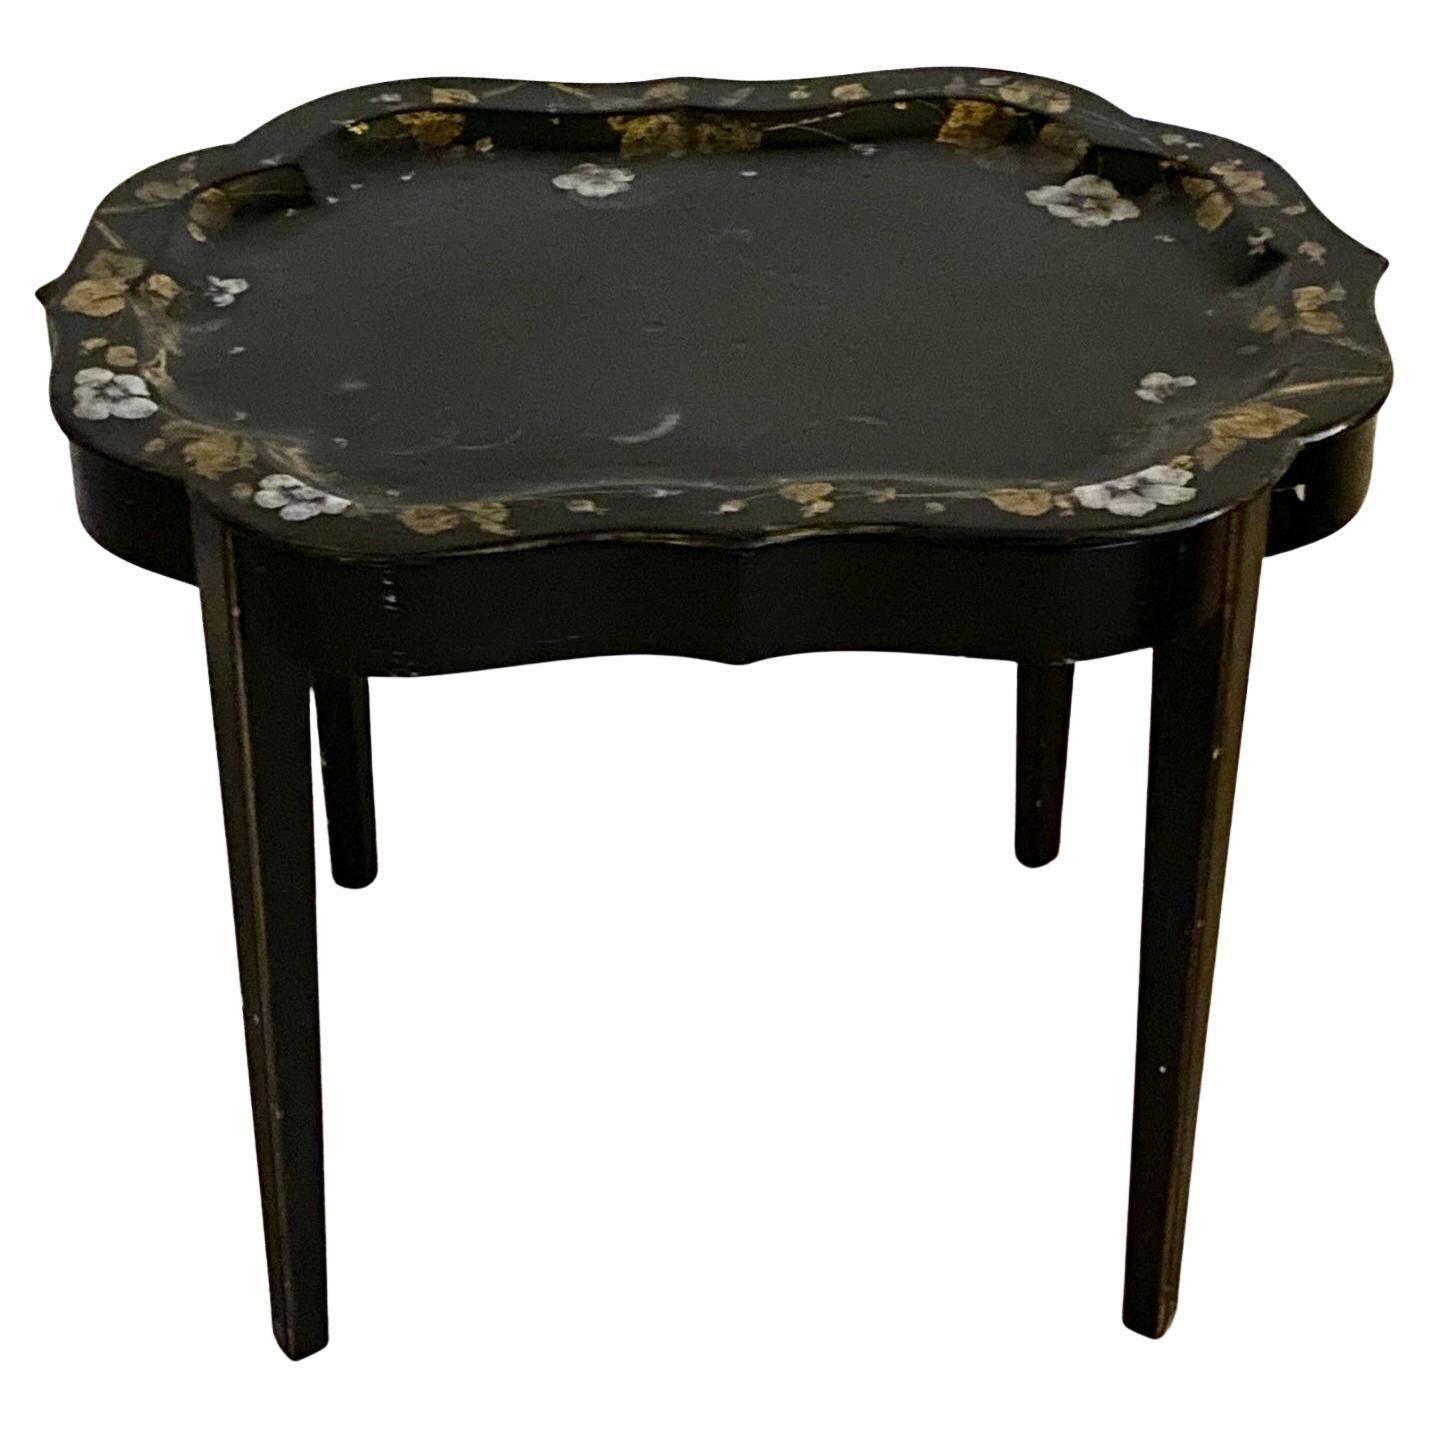 Danish Black-Painted Flower Decorated Coffee Tray Table, circa 1920s